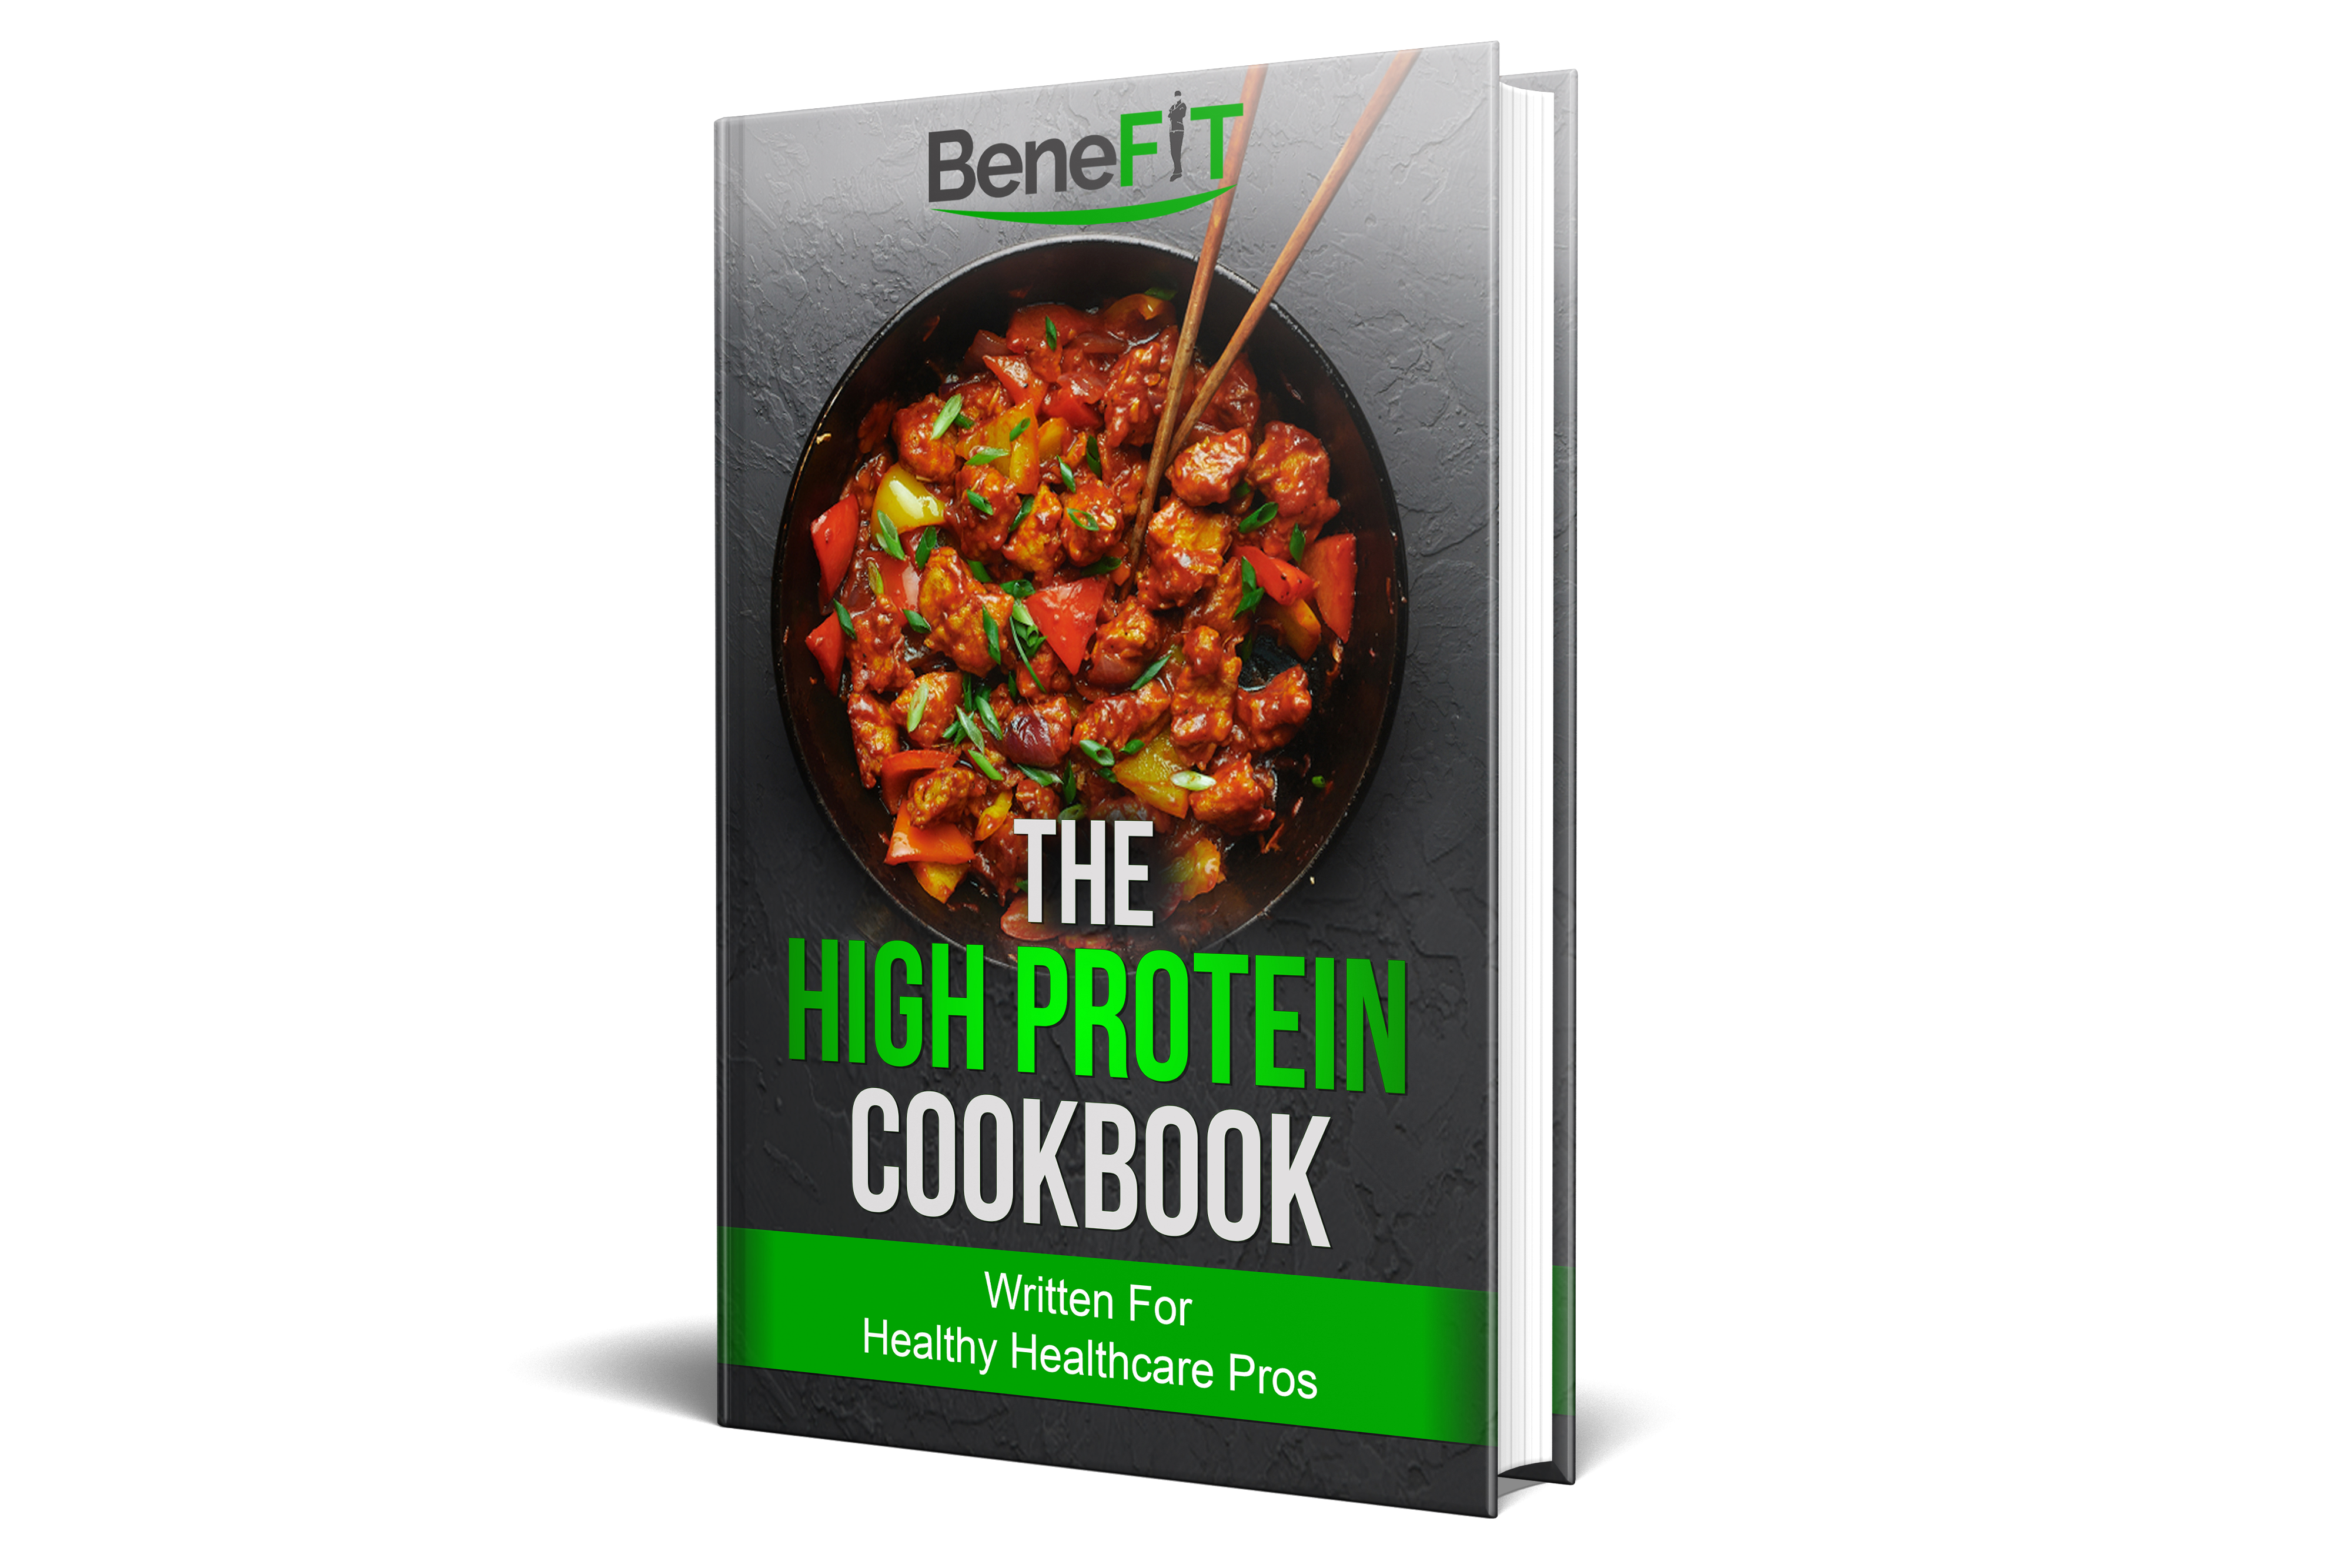 The High Protein Cookbook